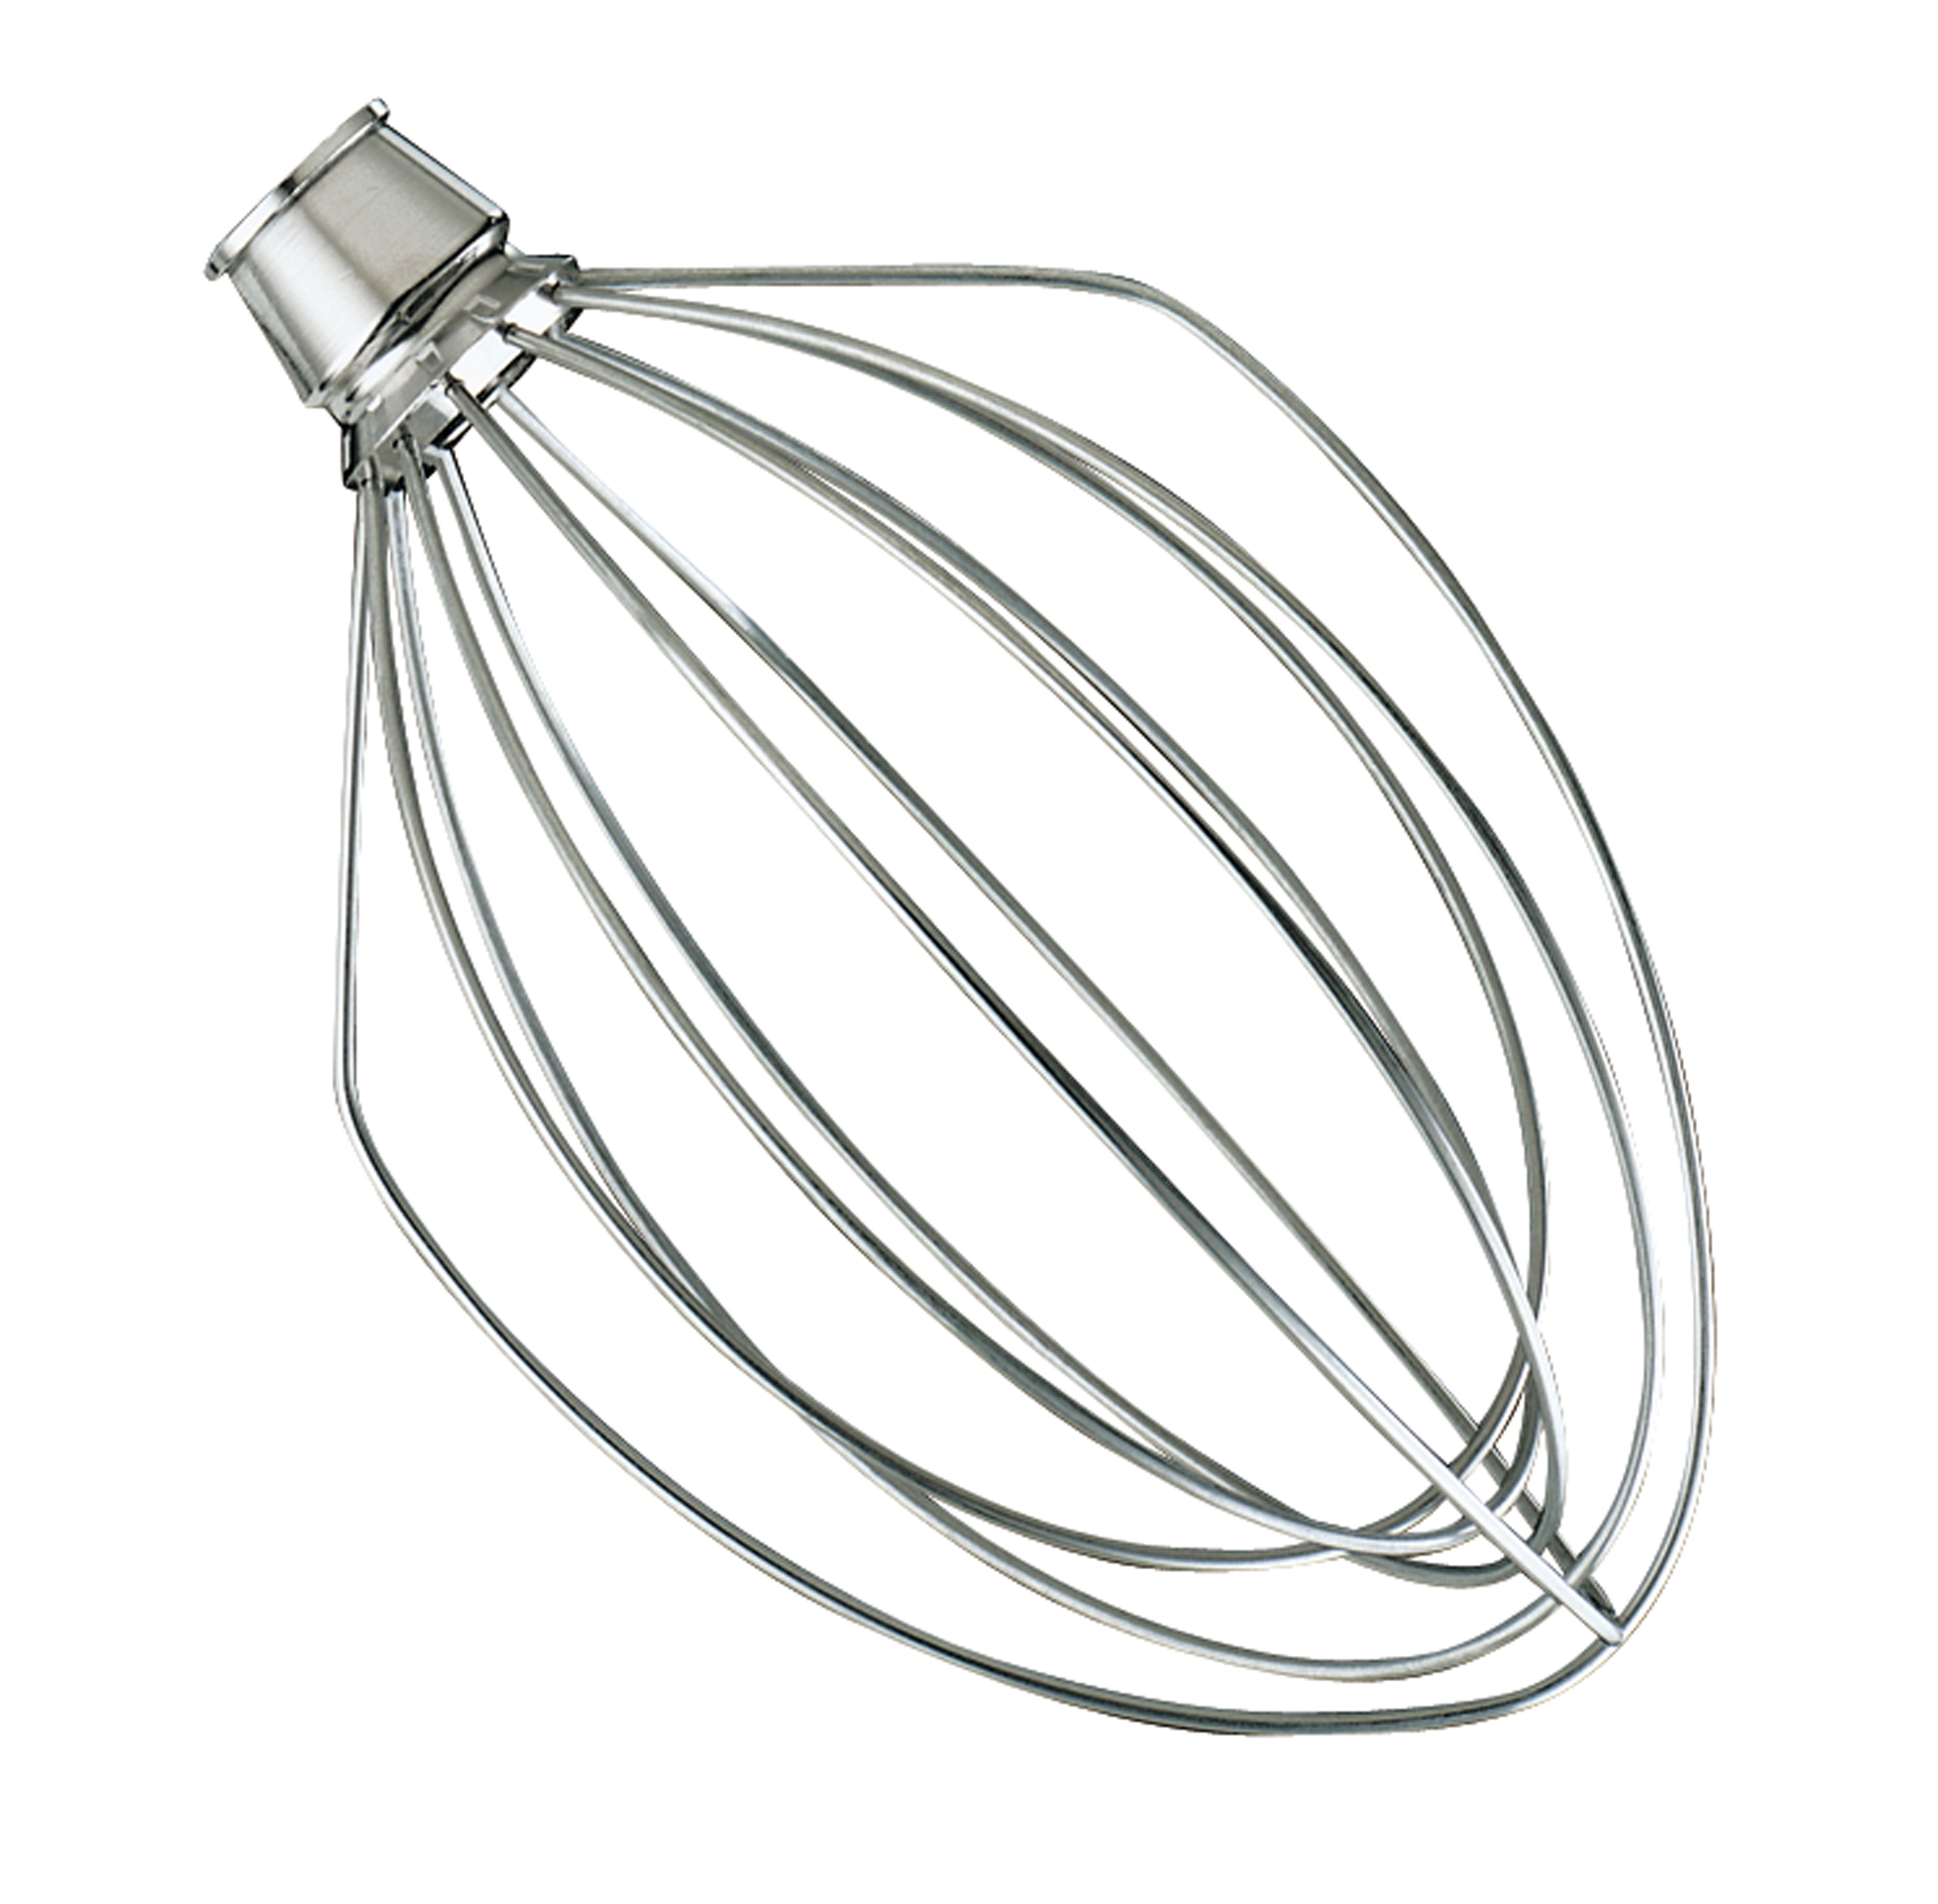 KN256 Stainless Steel Wire Whip for Bowl-Lift Mixer 6 Quart Bowl, 6 Wire Whisk Fits for Professional 600, KP26M1X,KD2661X,KP2671X,Pro 6500,Heavy